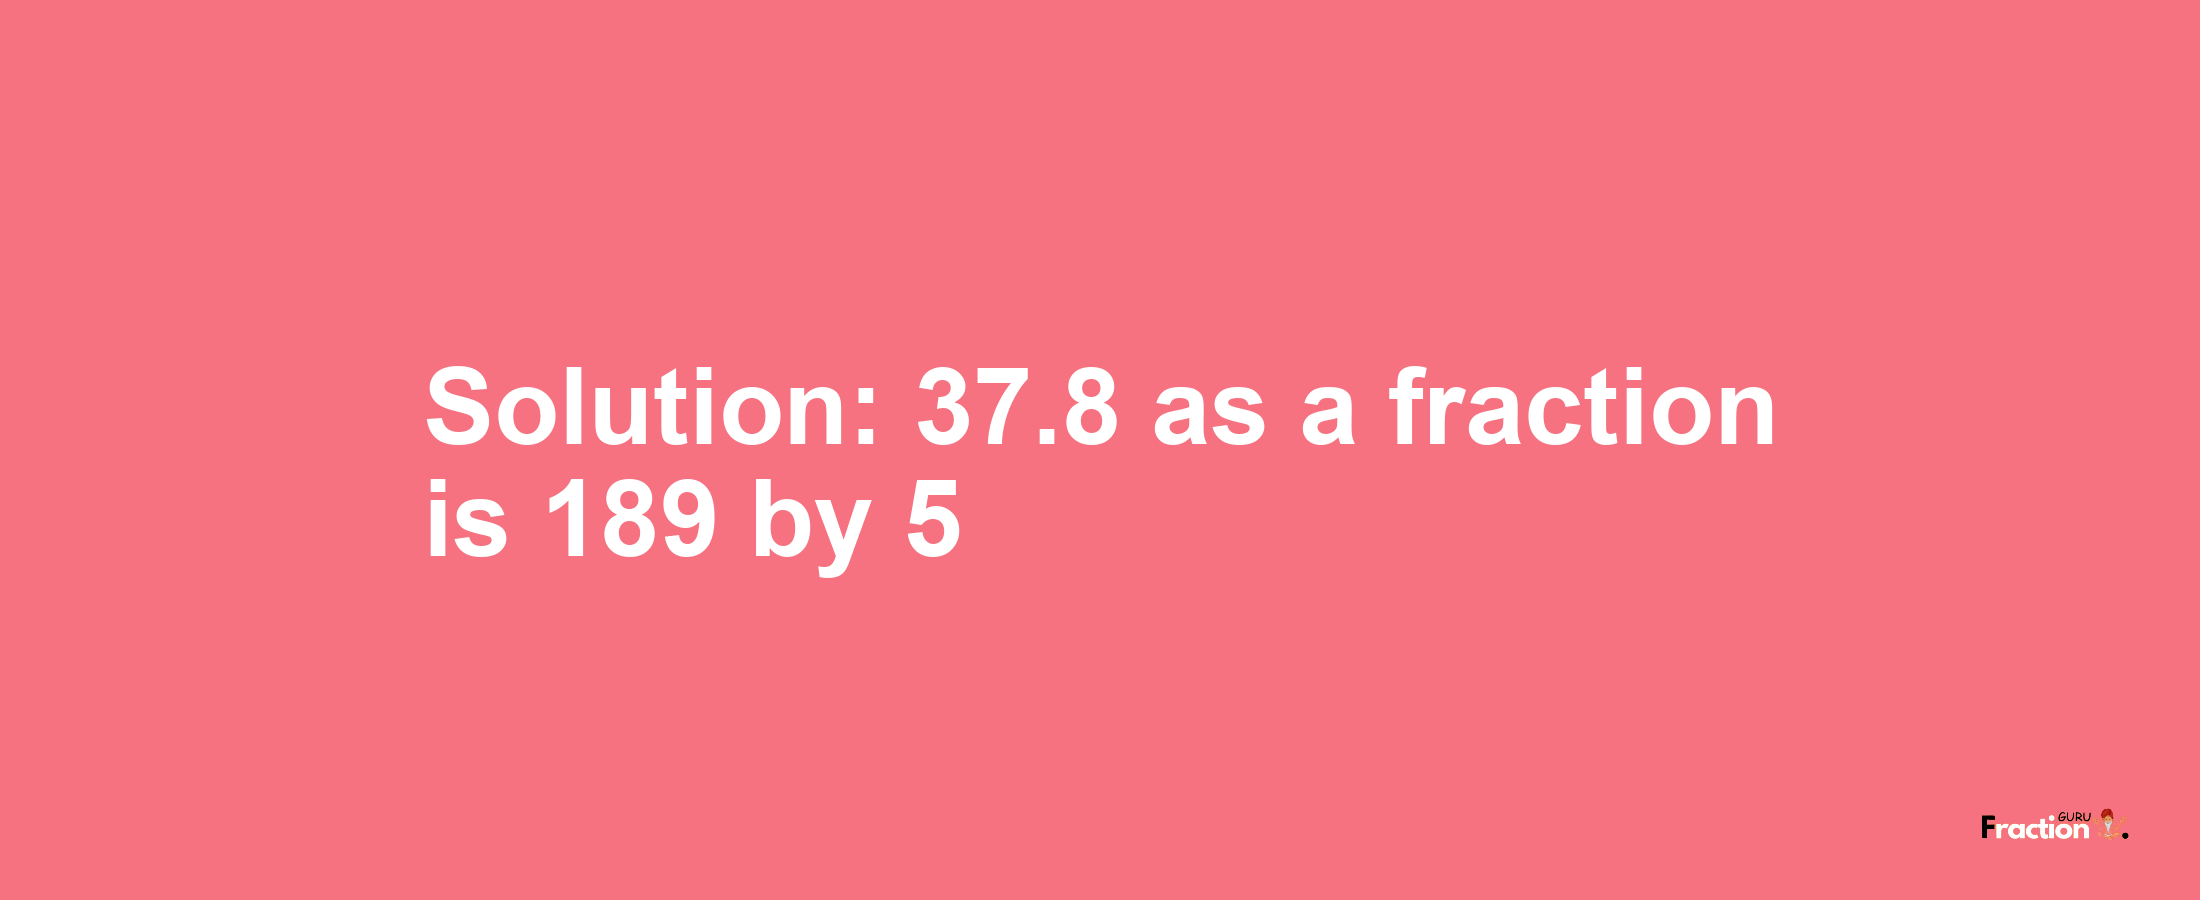 Solution:37.8 as a fraction is 189/5